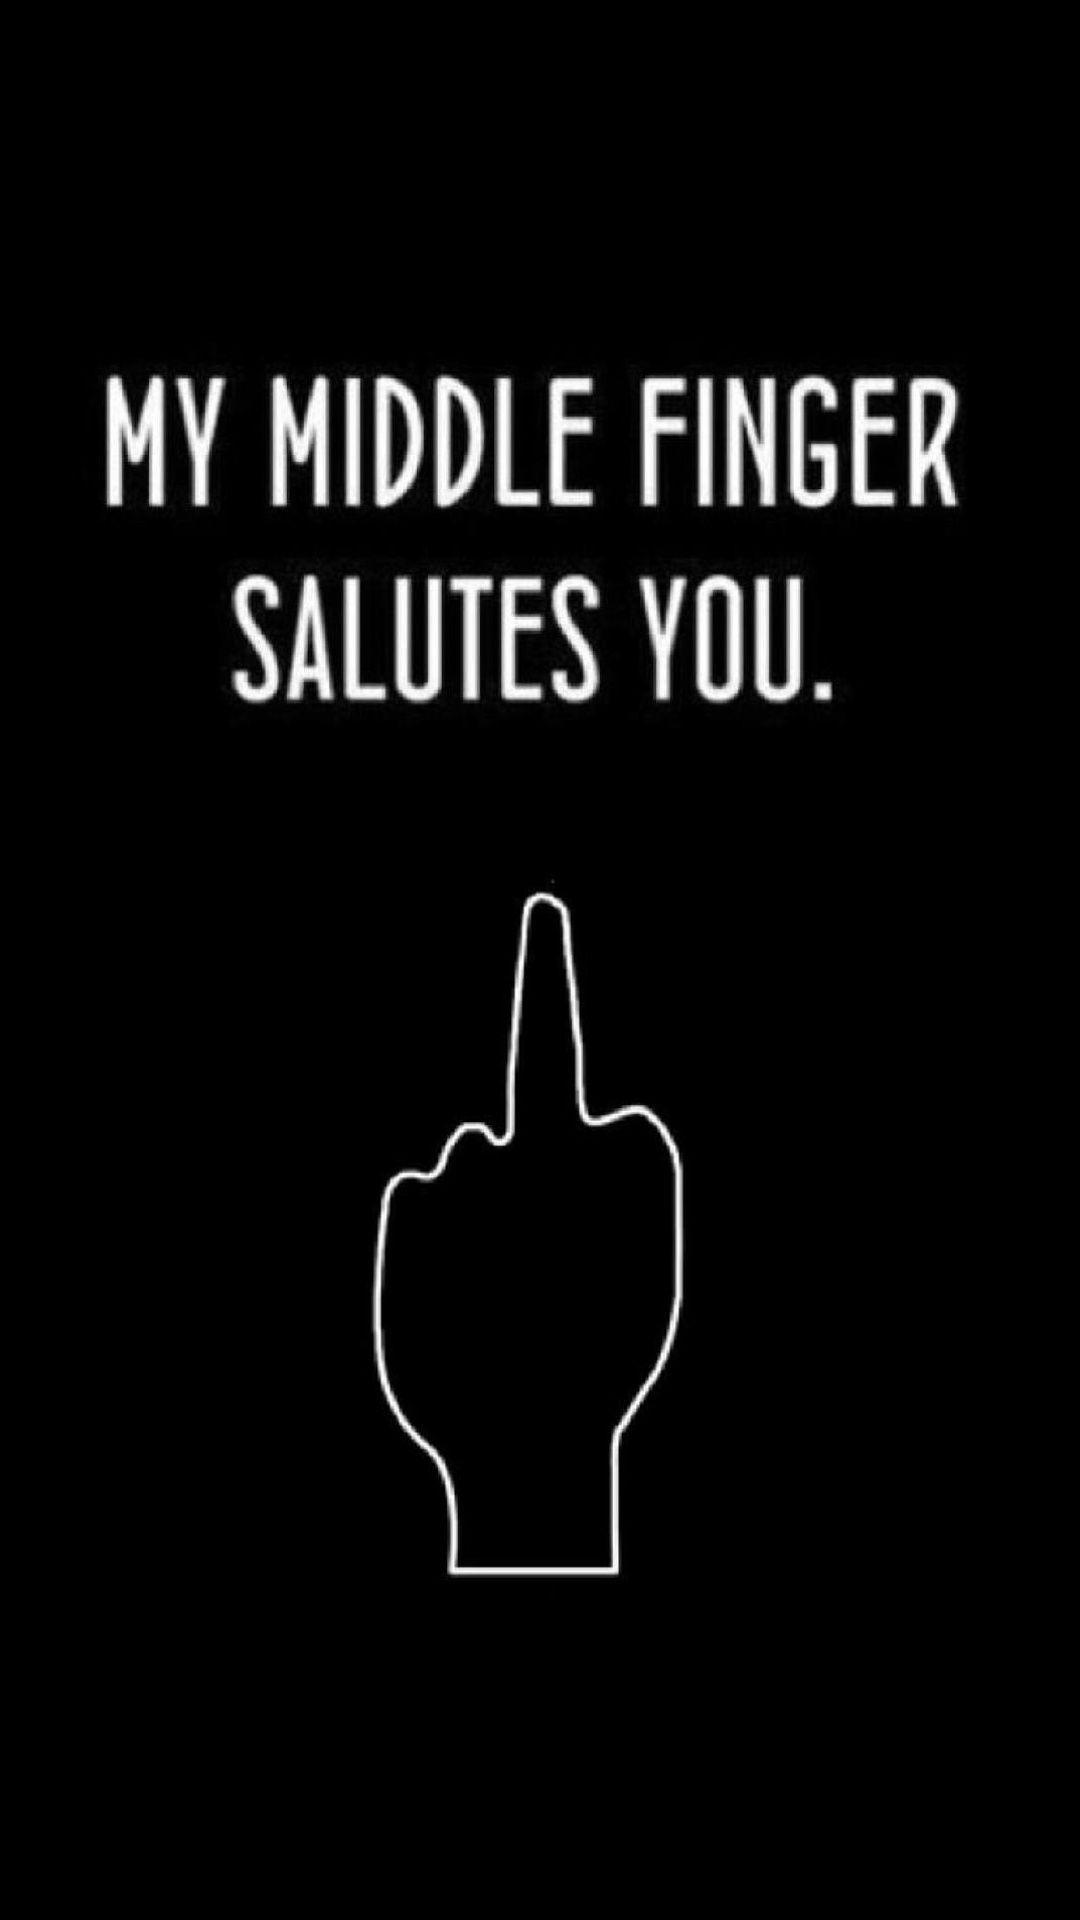 middle finger note to see more funny wallpaper for good